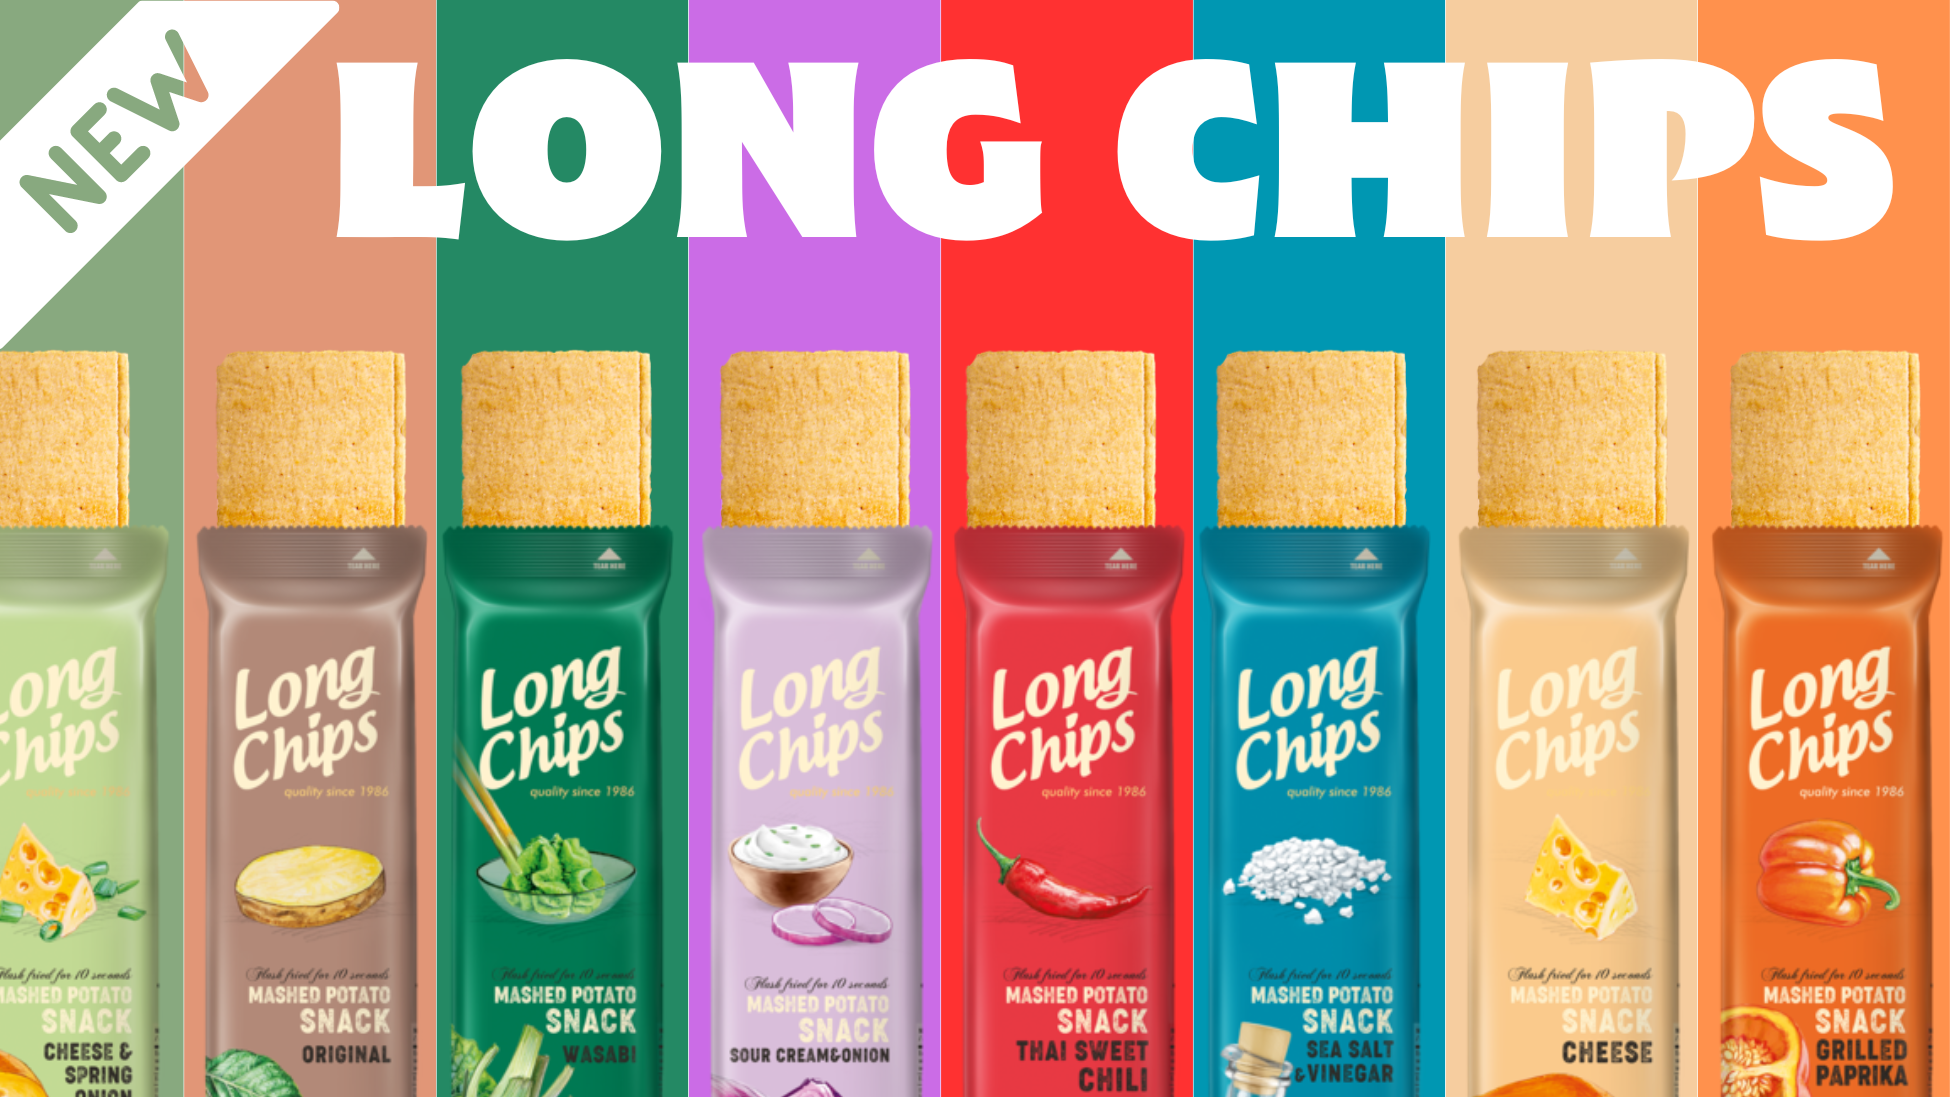 LONG CHIPS POSTER